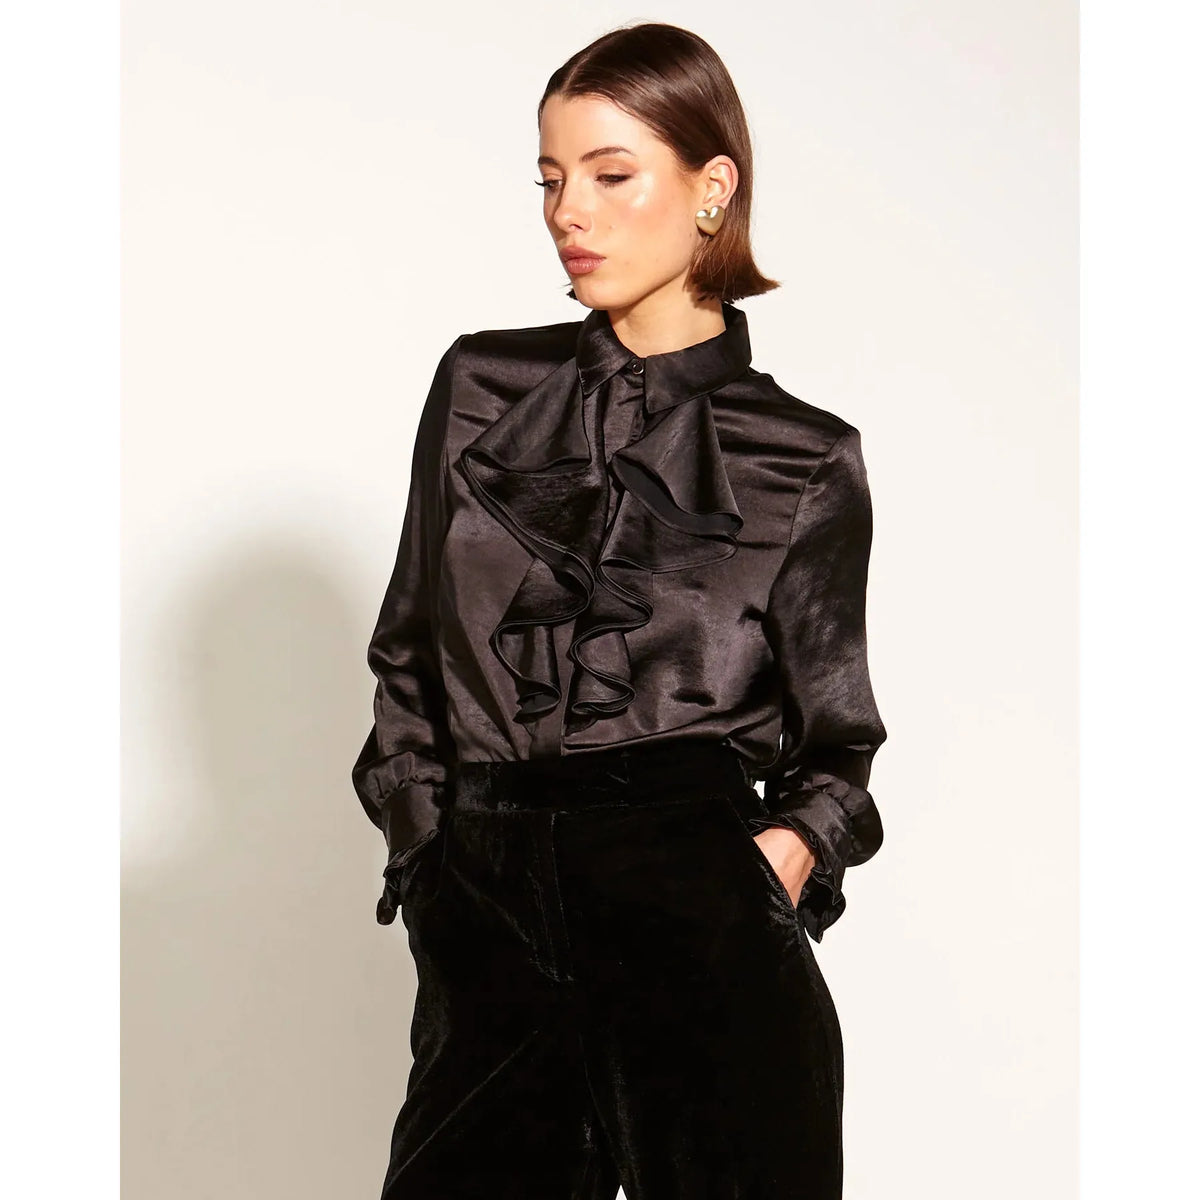 FATE + BECKER | Only She Knows Ruffle Shirt - Black